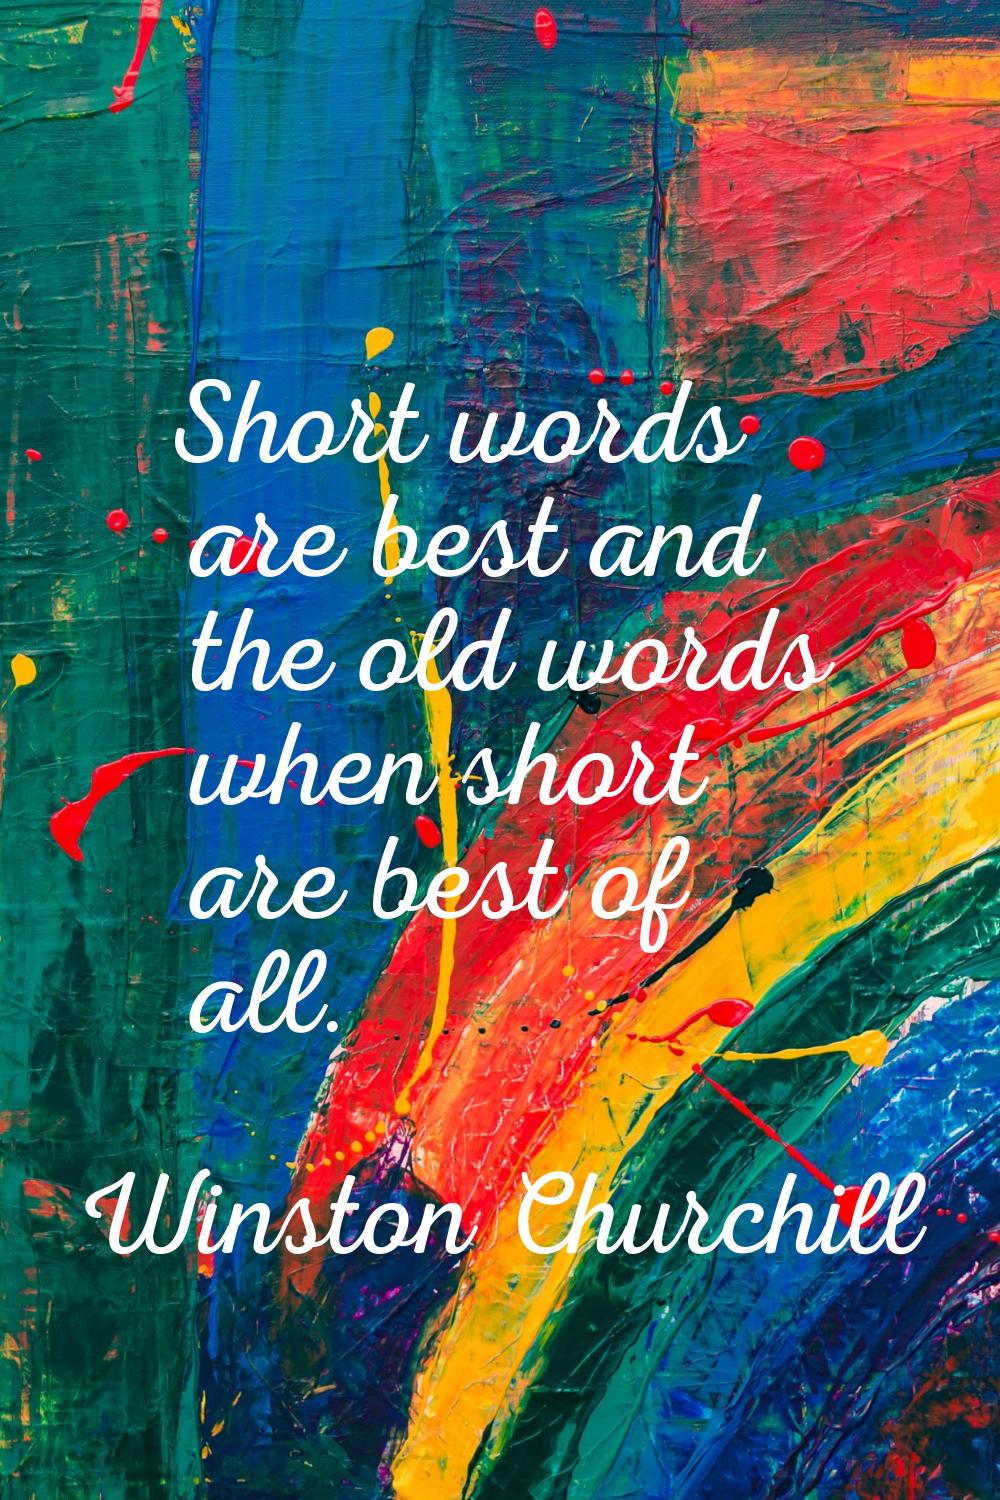 Short words are best and the old words when short are best of all.